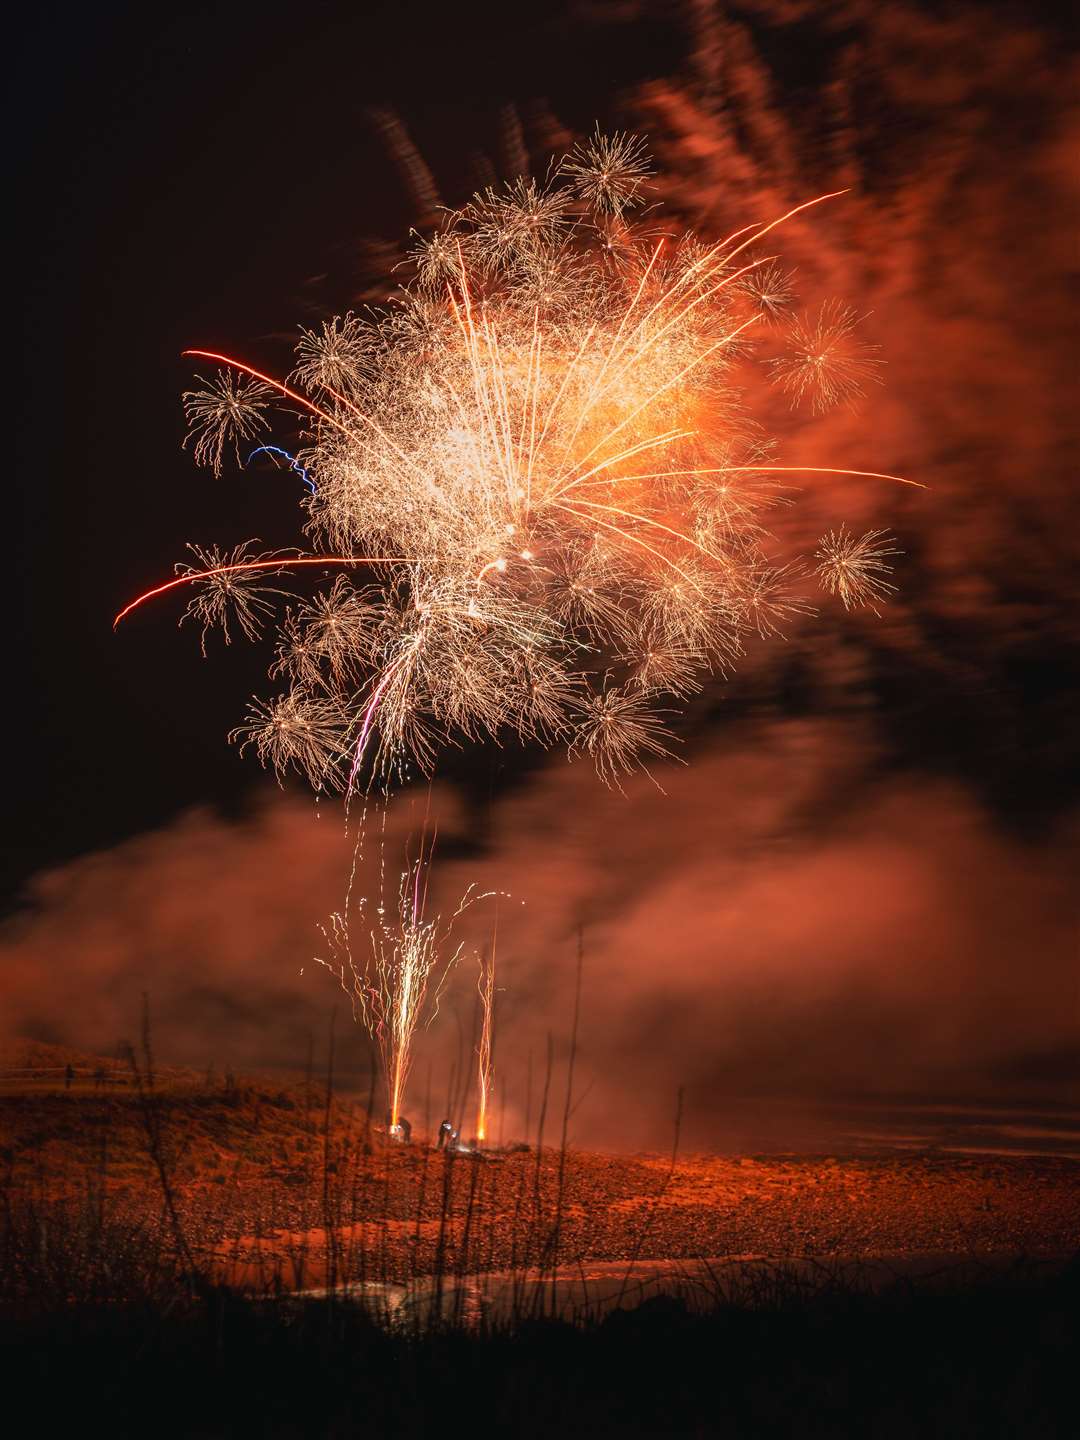 The fireworks display at Brora on New Year's Day was spectacular. Picture: Ewen Pryde